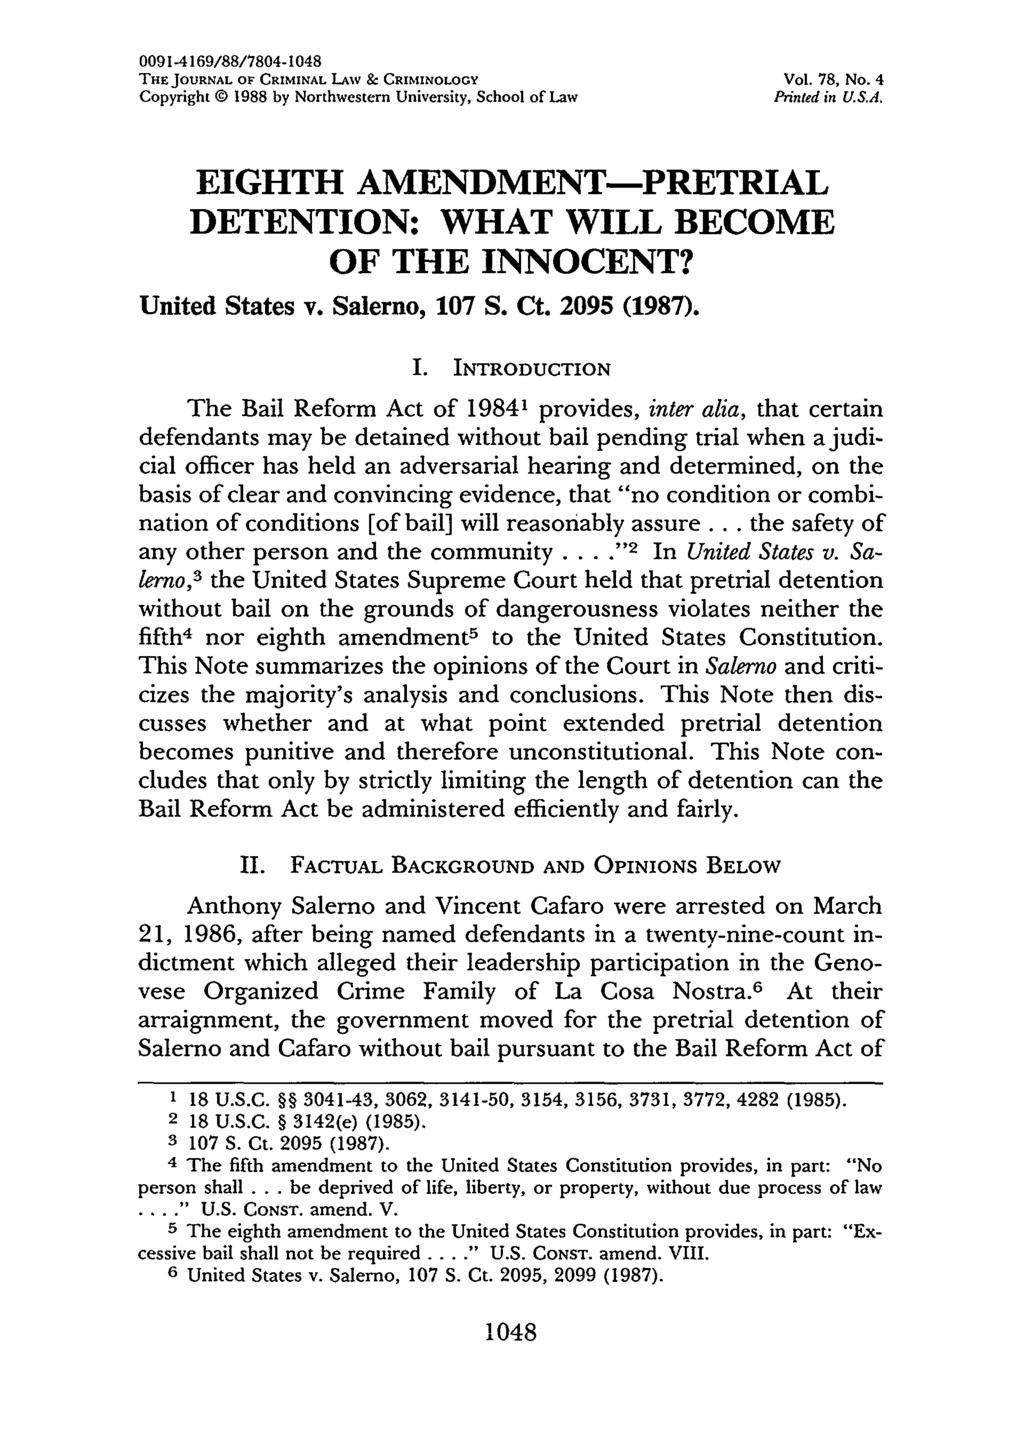 0091-4169/88/7804-1048 THE JOURNAL OF CRIMINAL LAW & CRIMINOLOGY Vol. 78, No. 4 Copyright 0 1988 by Northwestern University, School of Law Printed in U.SA.